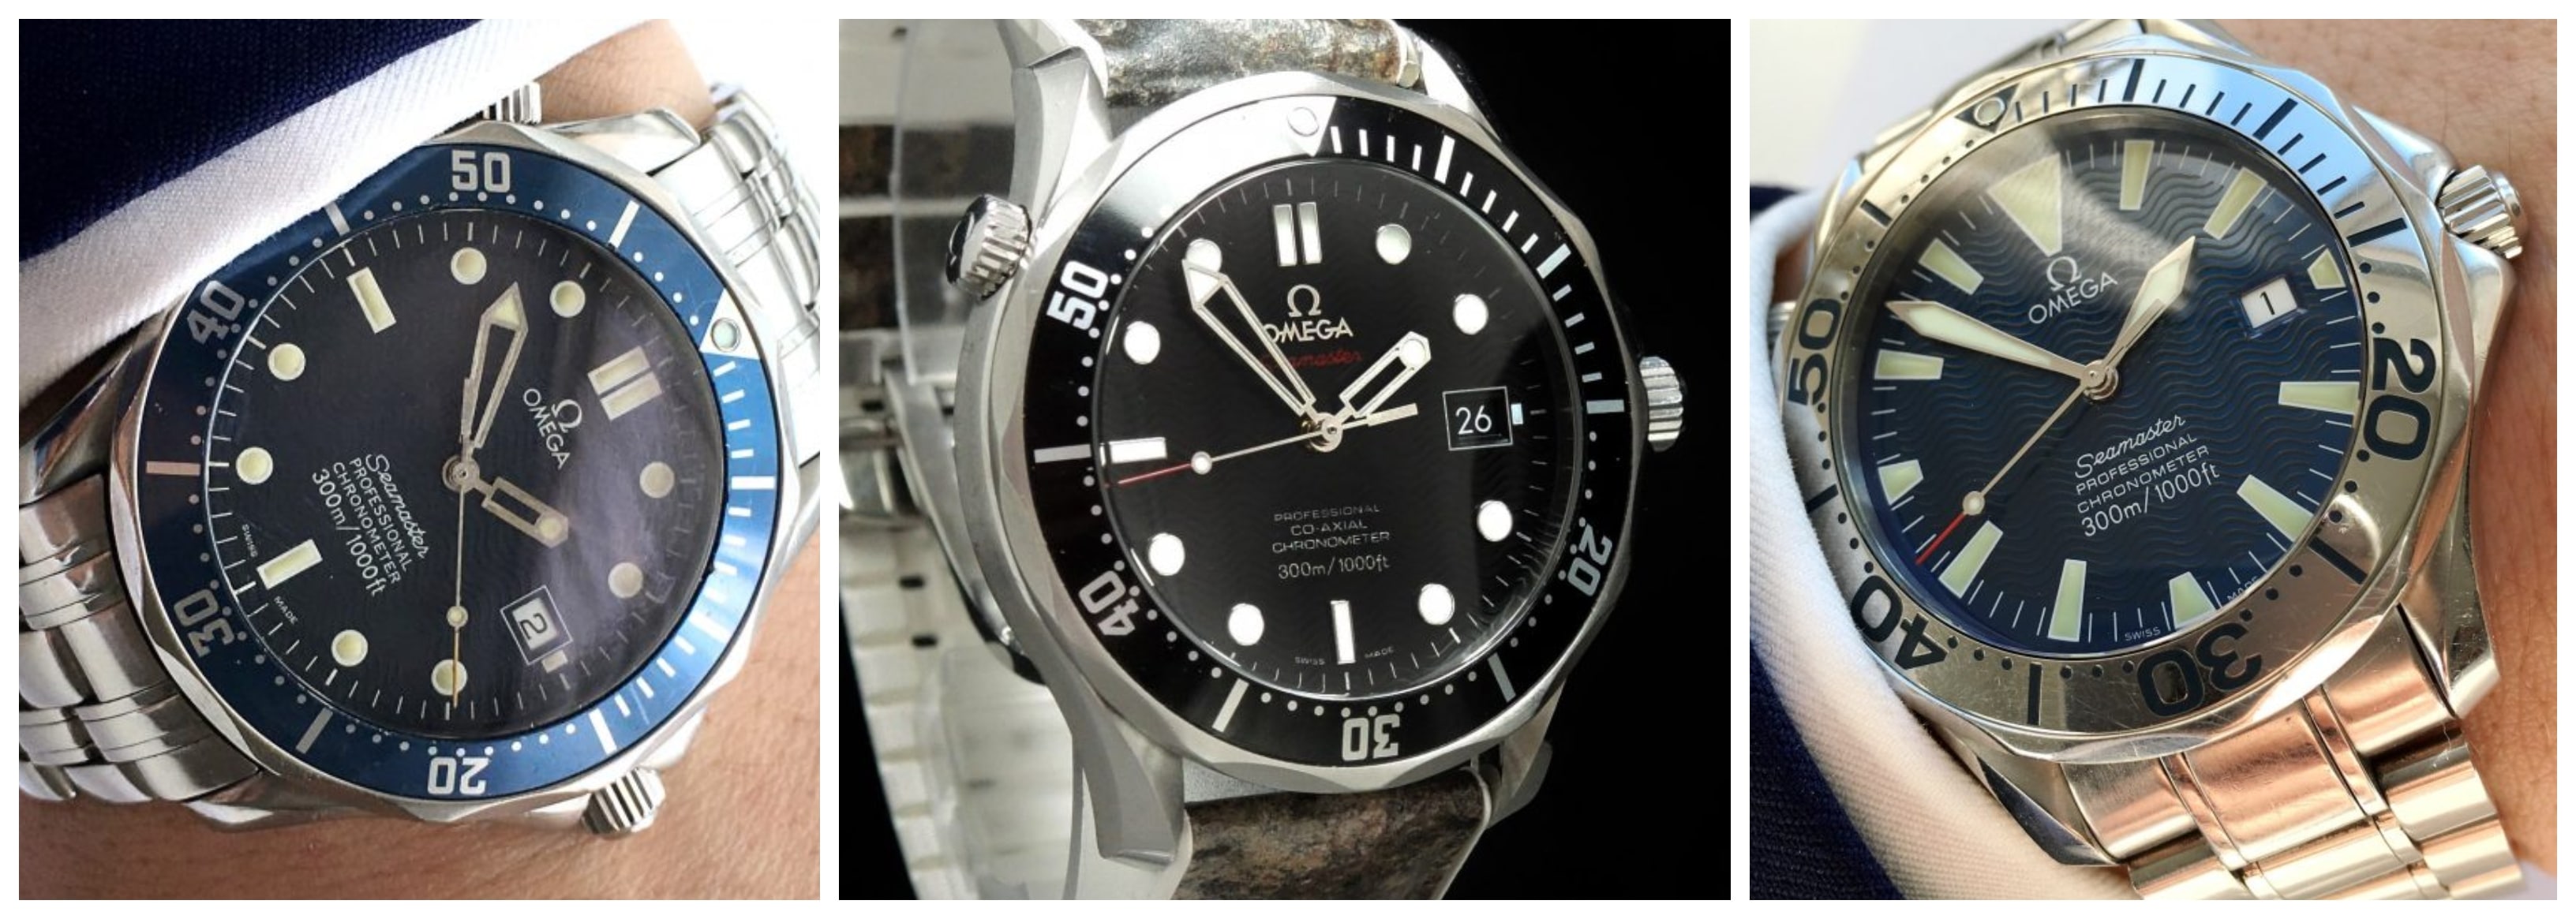 A Brief History of the Omega Seamaster